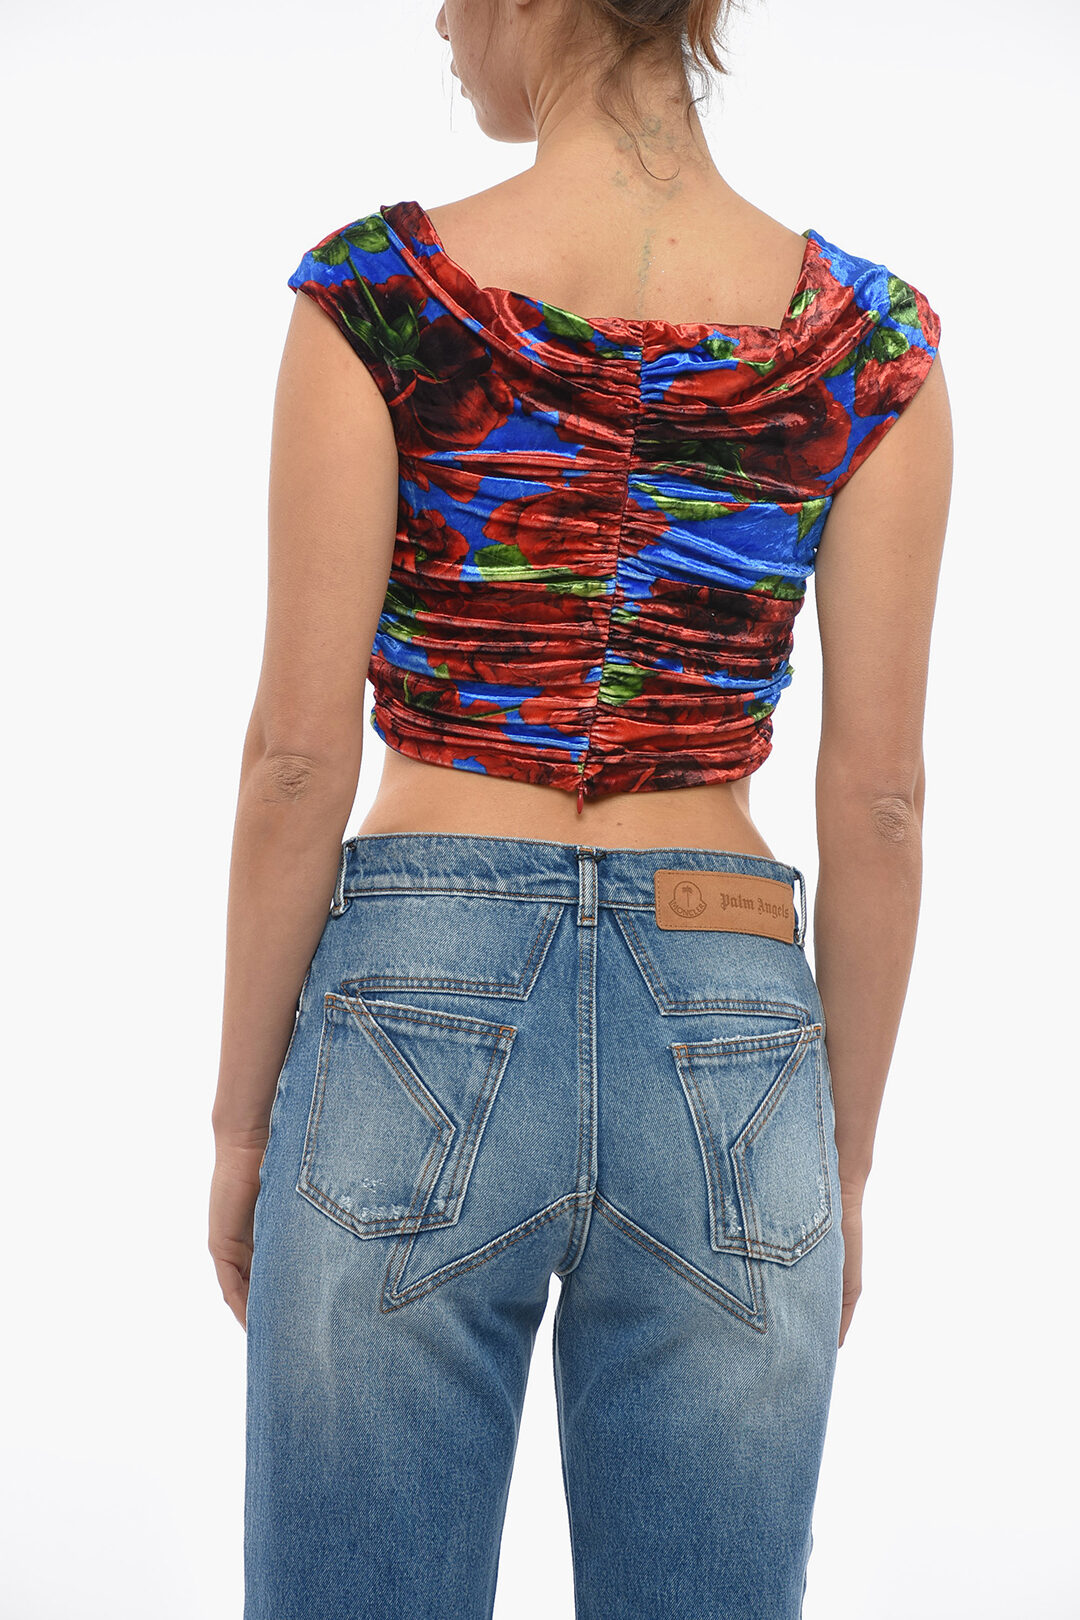 Magda Butrym Floral Patterned Velvet Crop Top with Cut-Out Detail